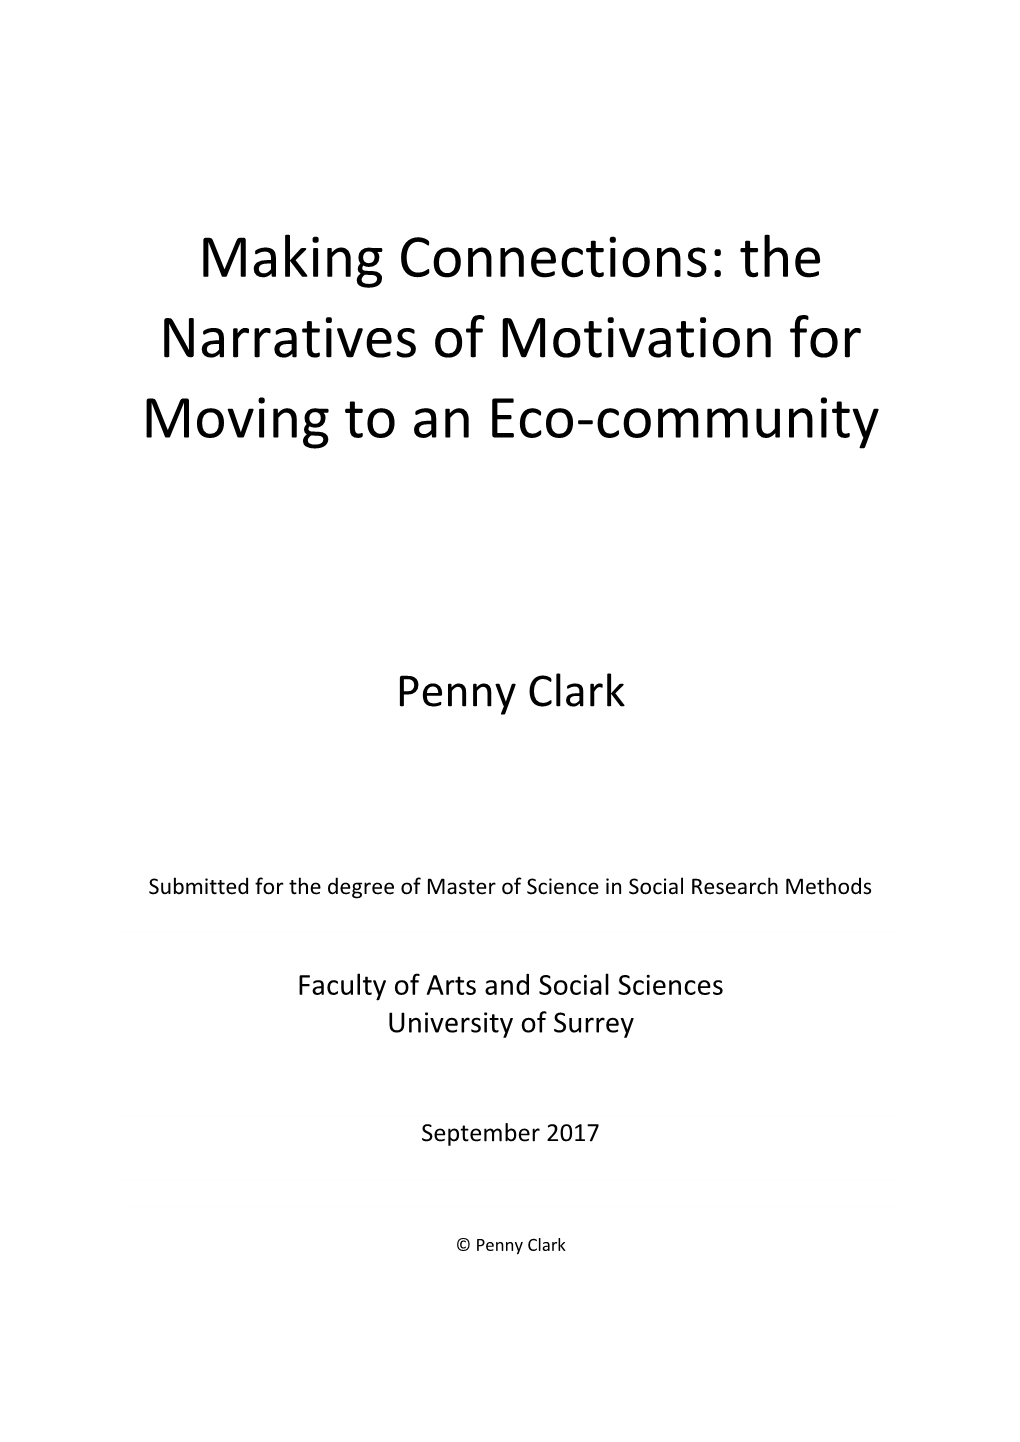 Making Connections: the Narratives of Motivation for Moving to an Eco-Community